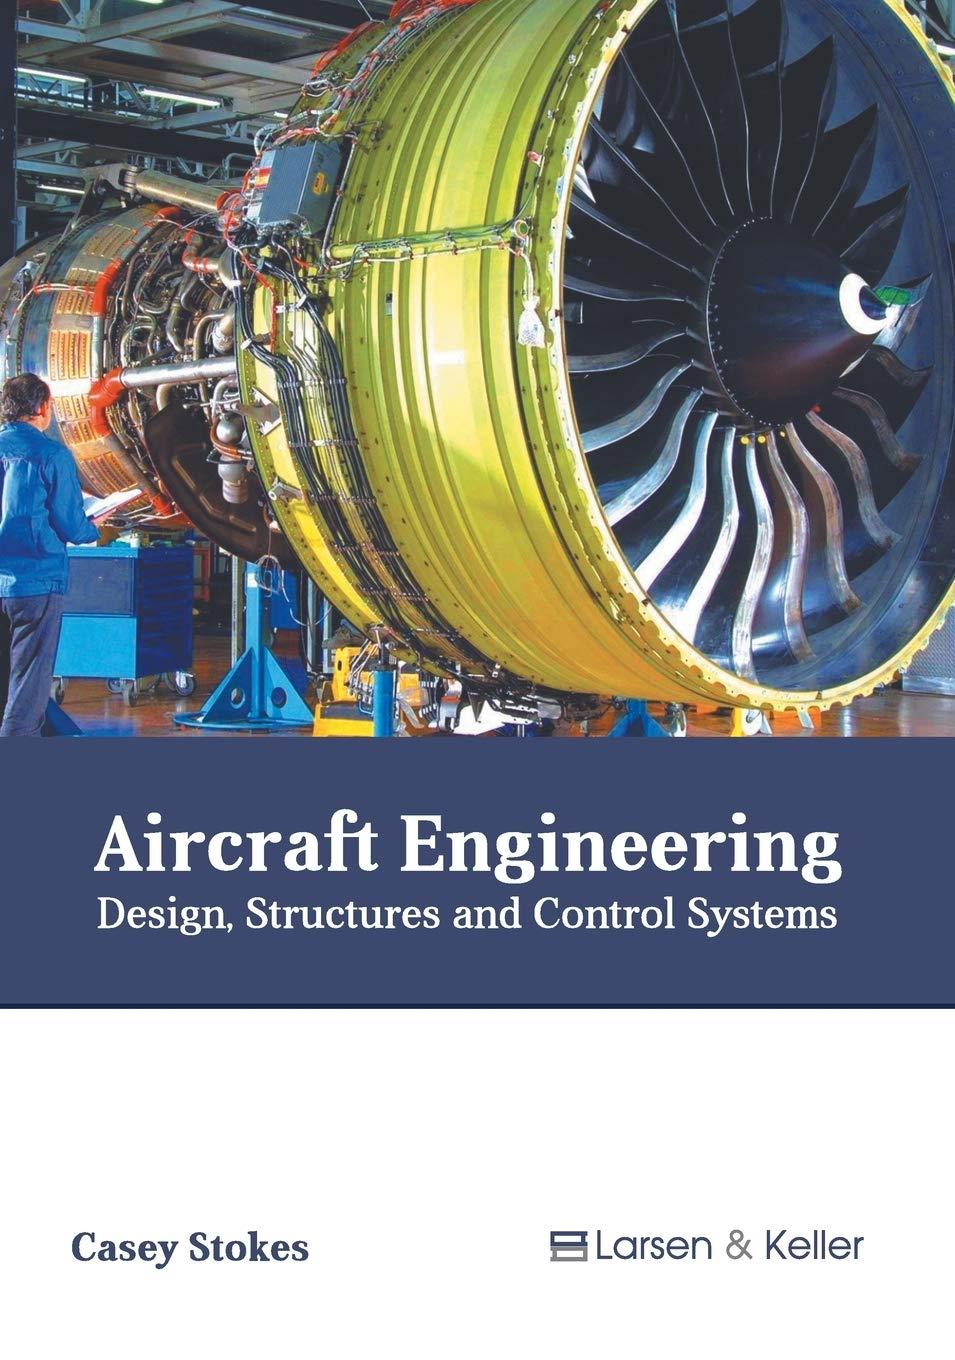 aircraft engineering design structures and control systems 1st edition casey stokes 1641721391, 978-1641721394